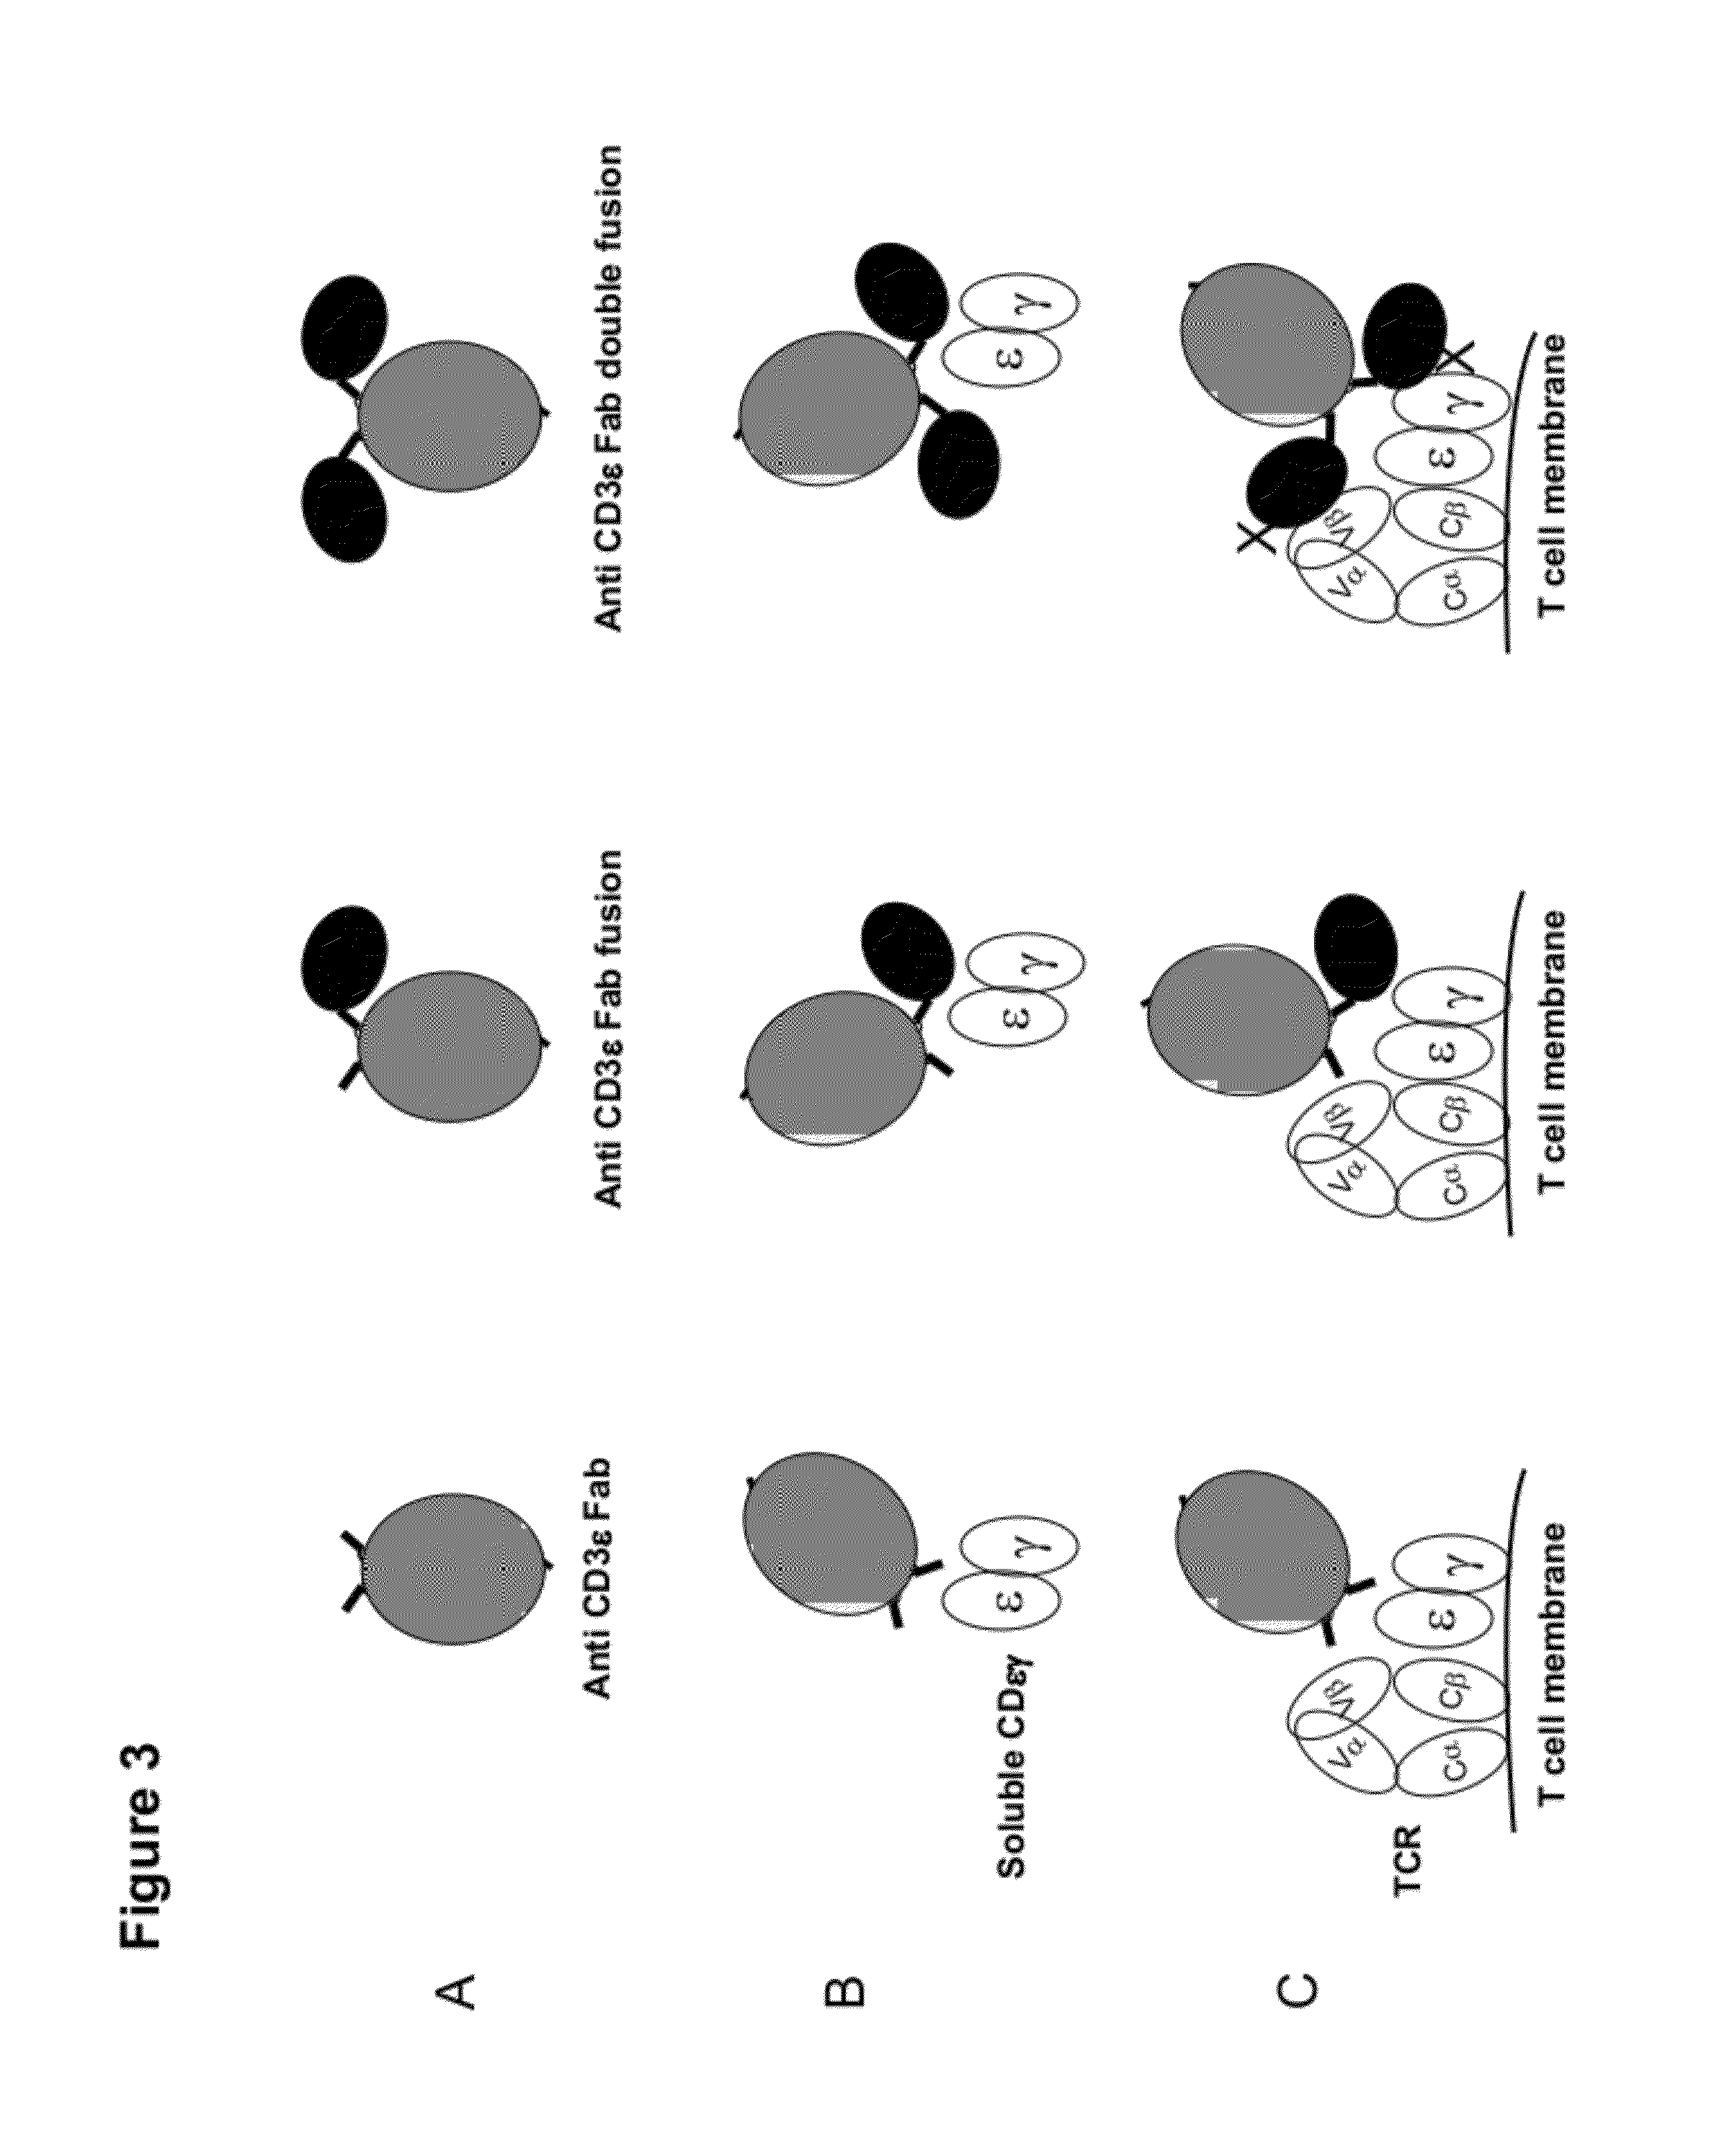 Multi-specific FAB fusion proteins and methods of use